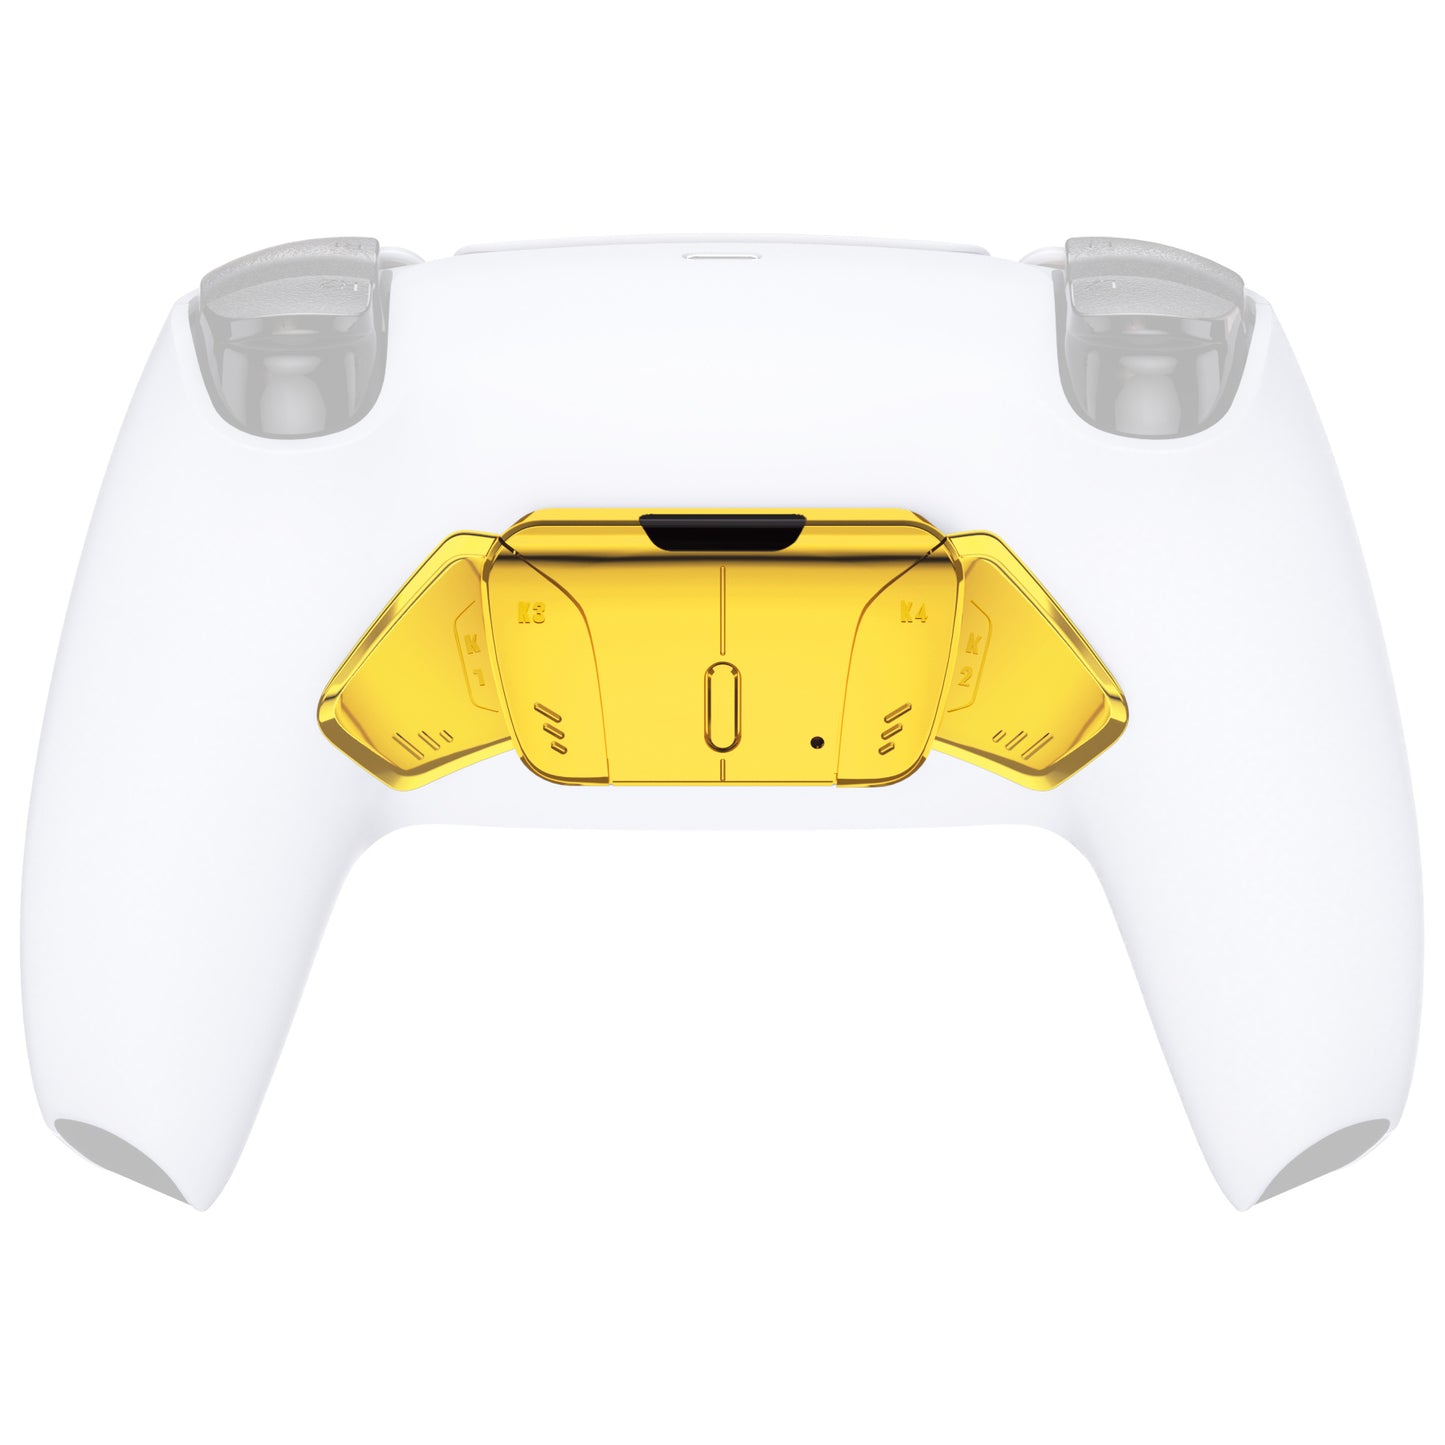 eXtremeRate Retail Chrome Gold Replacement Redesigned K1 K2 K3 K4 Back Buttons Housing Shell for PS5 Controller eXtremeRate RISE4 Remap Kit - Controller & RISE4 Remap Board NOT Included - VPFD4001